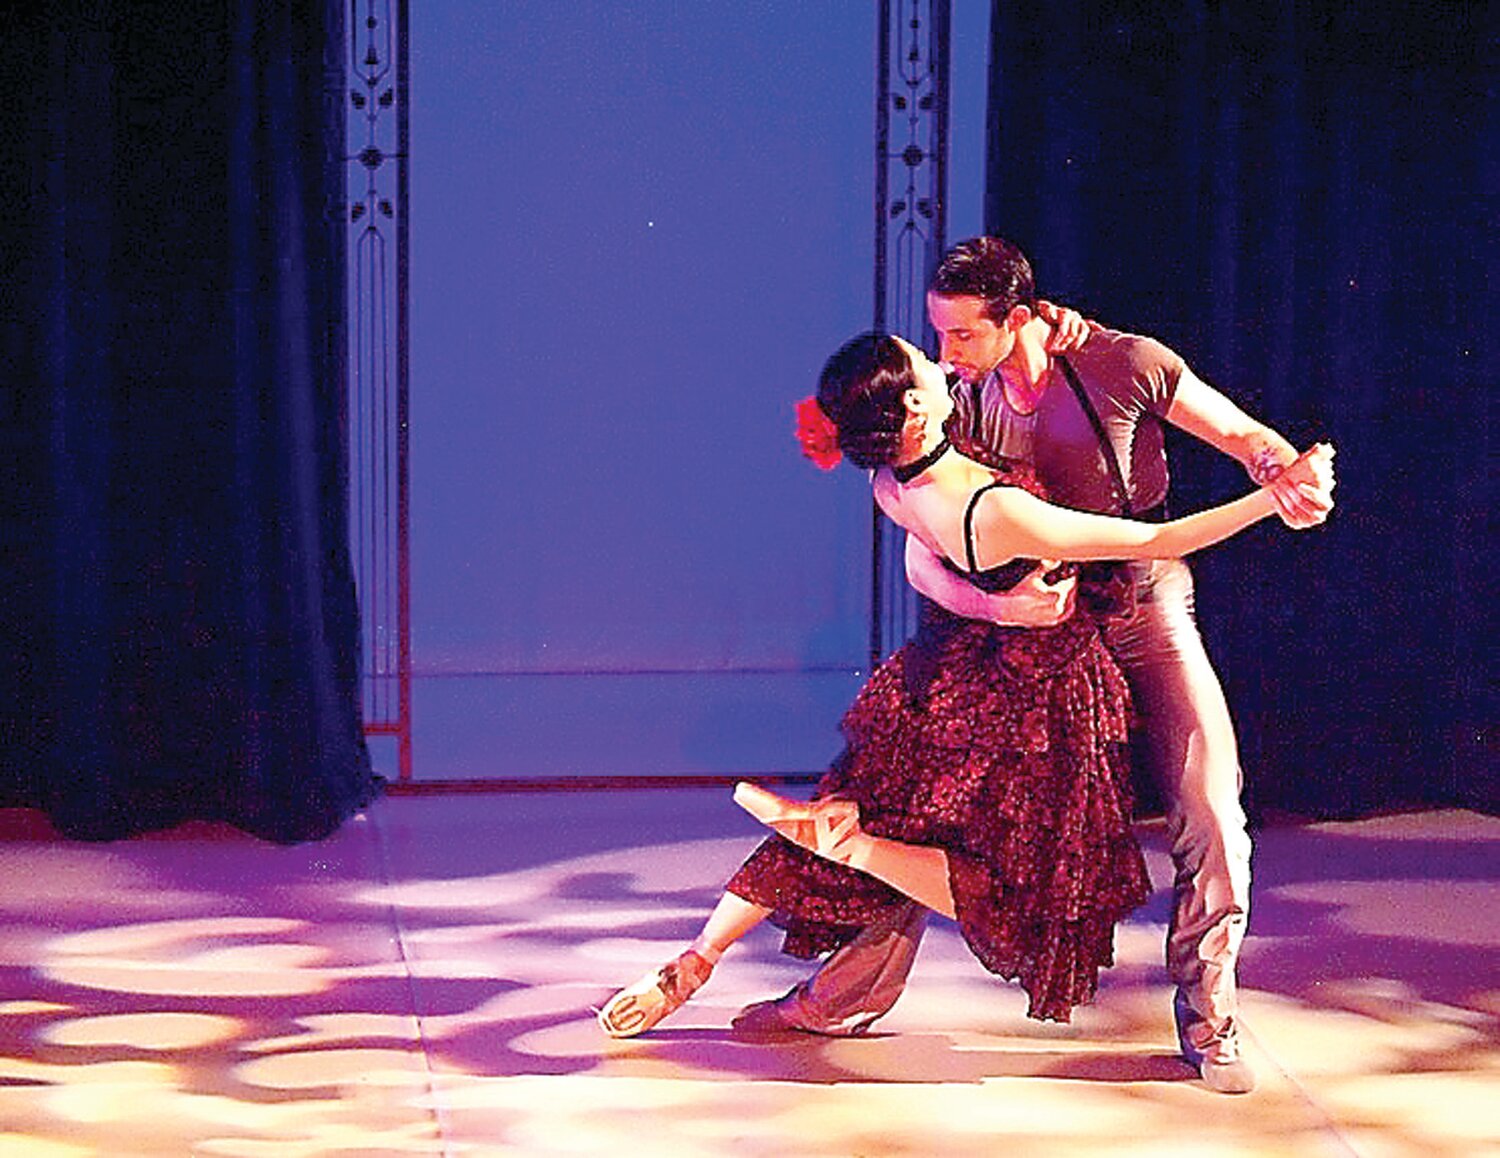 Roxey Ballet opens its spring season with “Carmen” choreographed by founder Mark Roxey.